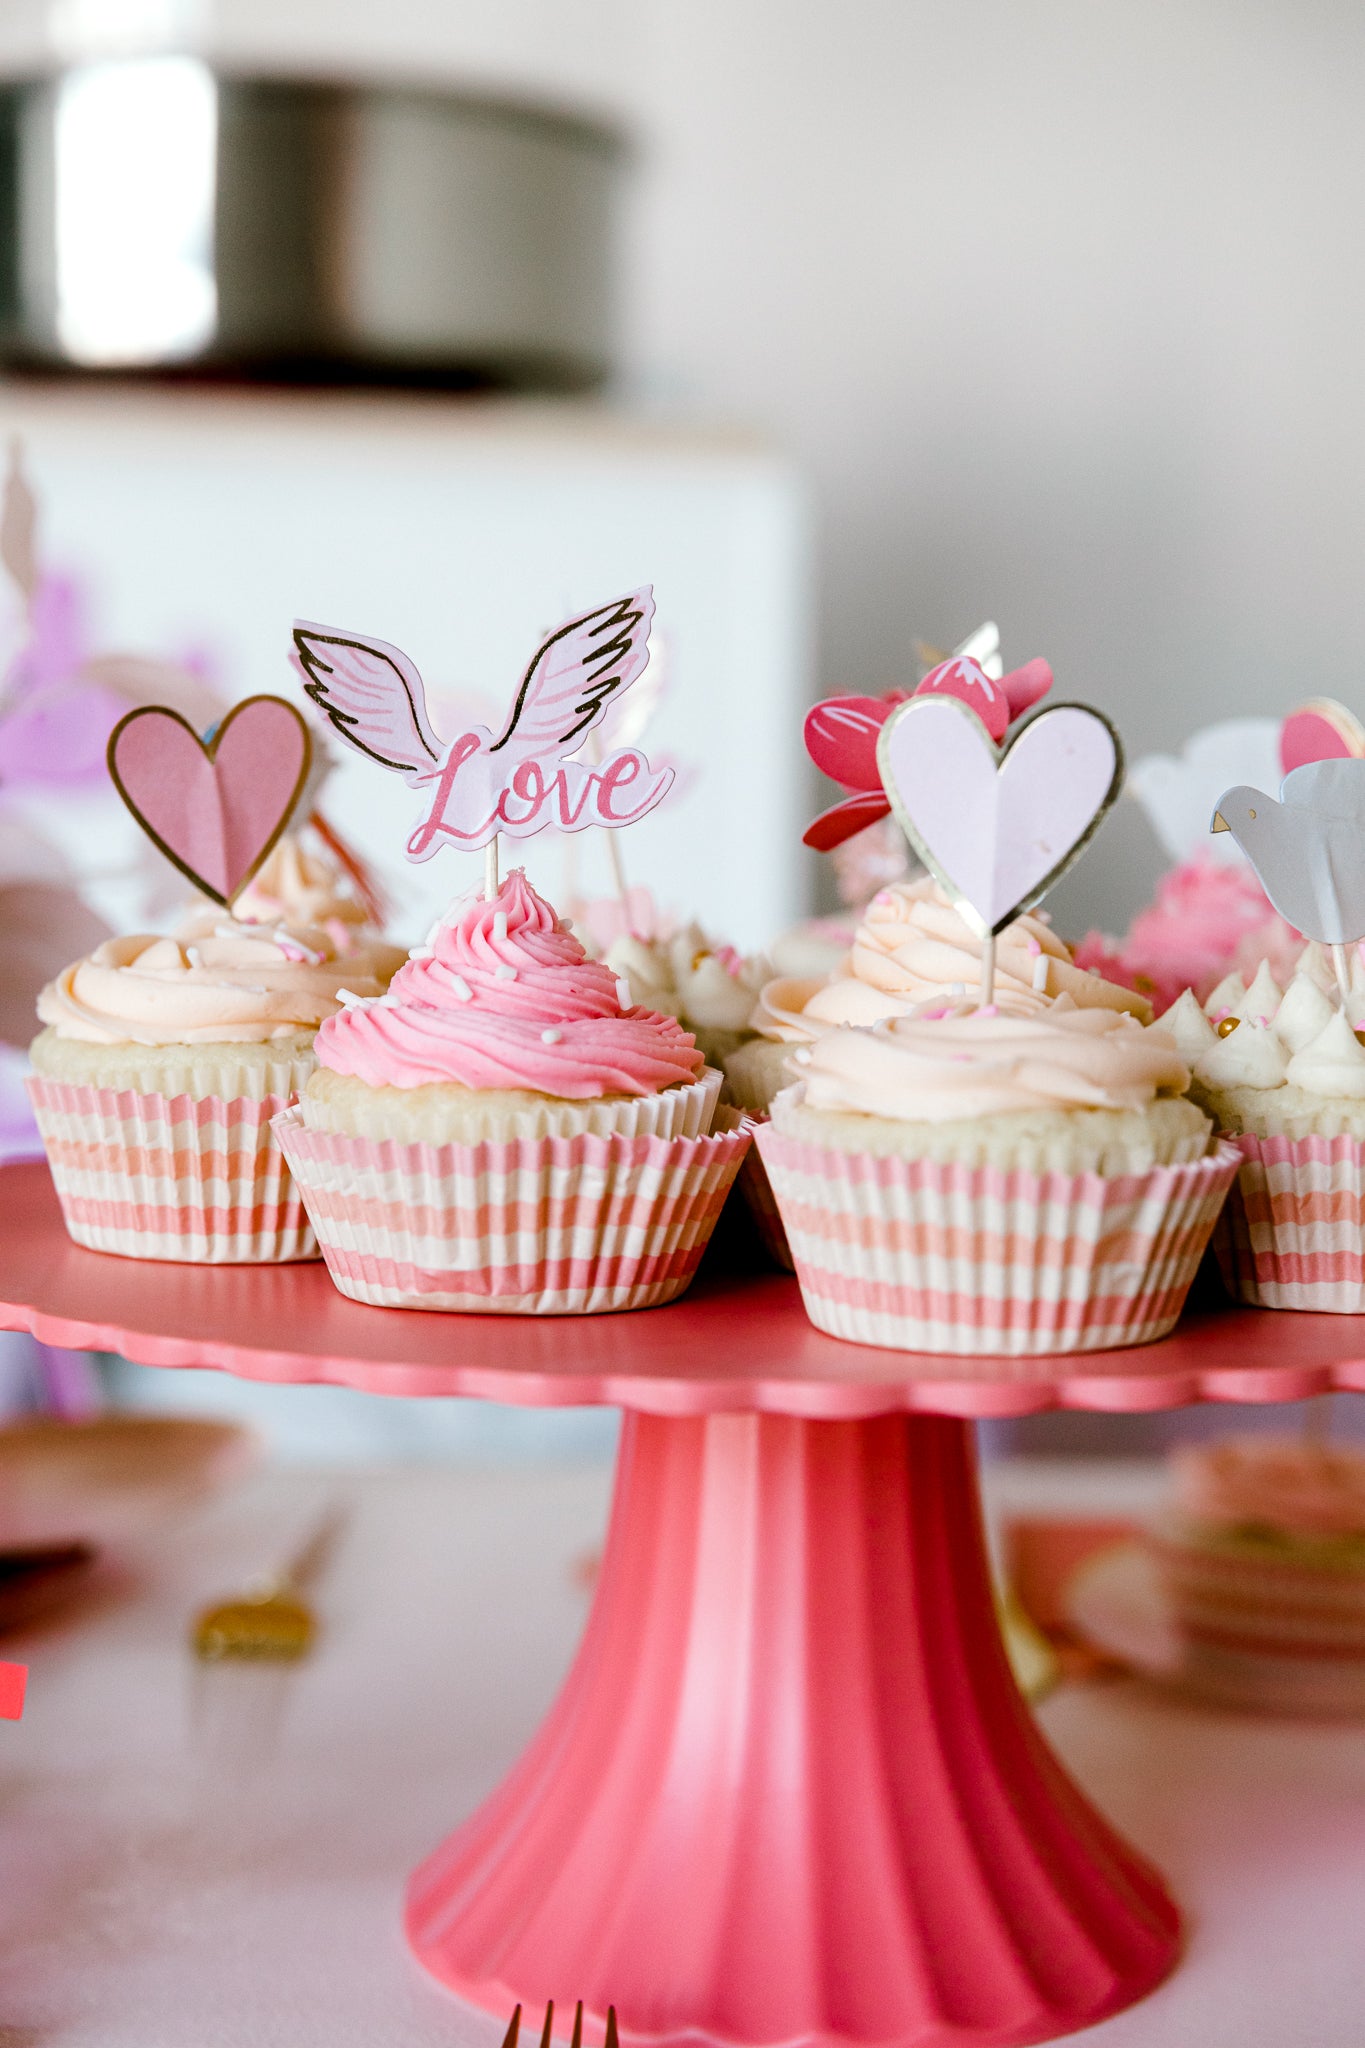 Valentine's Day cupcakes with themed toppers and tins